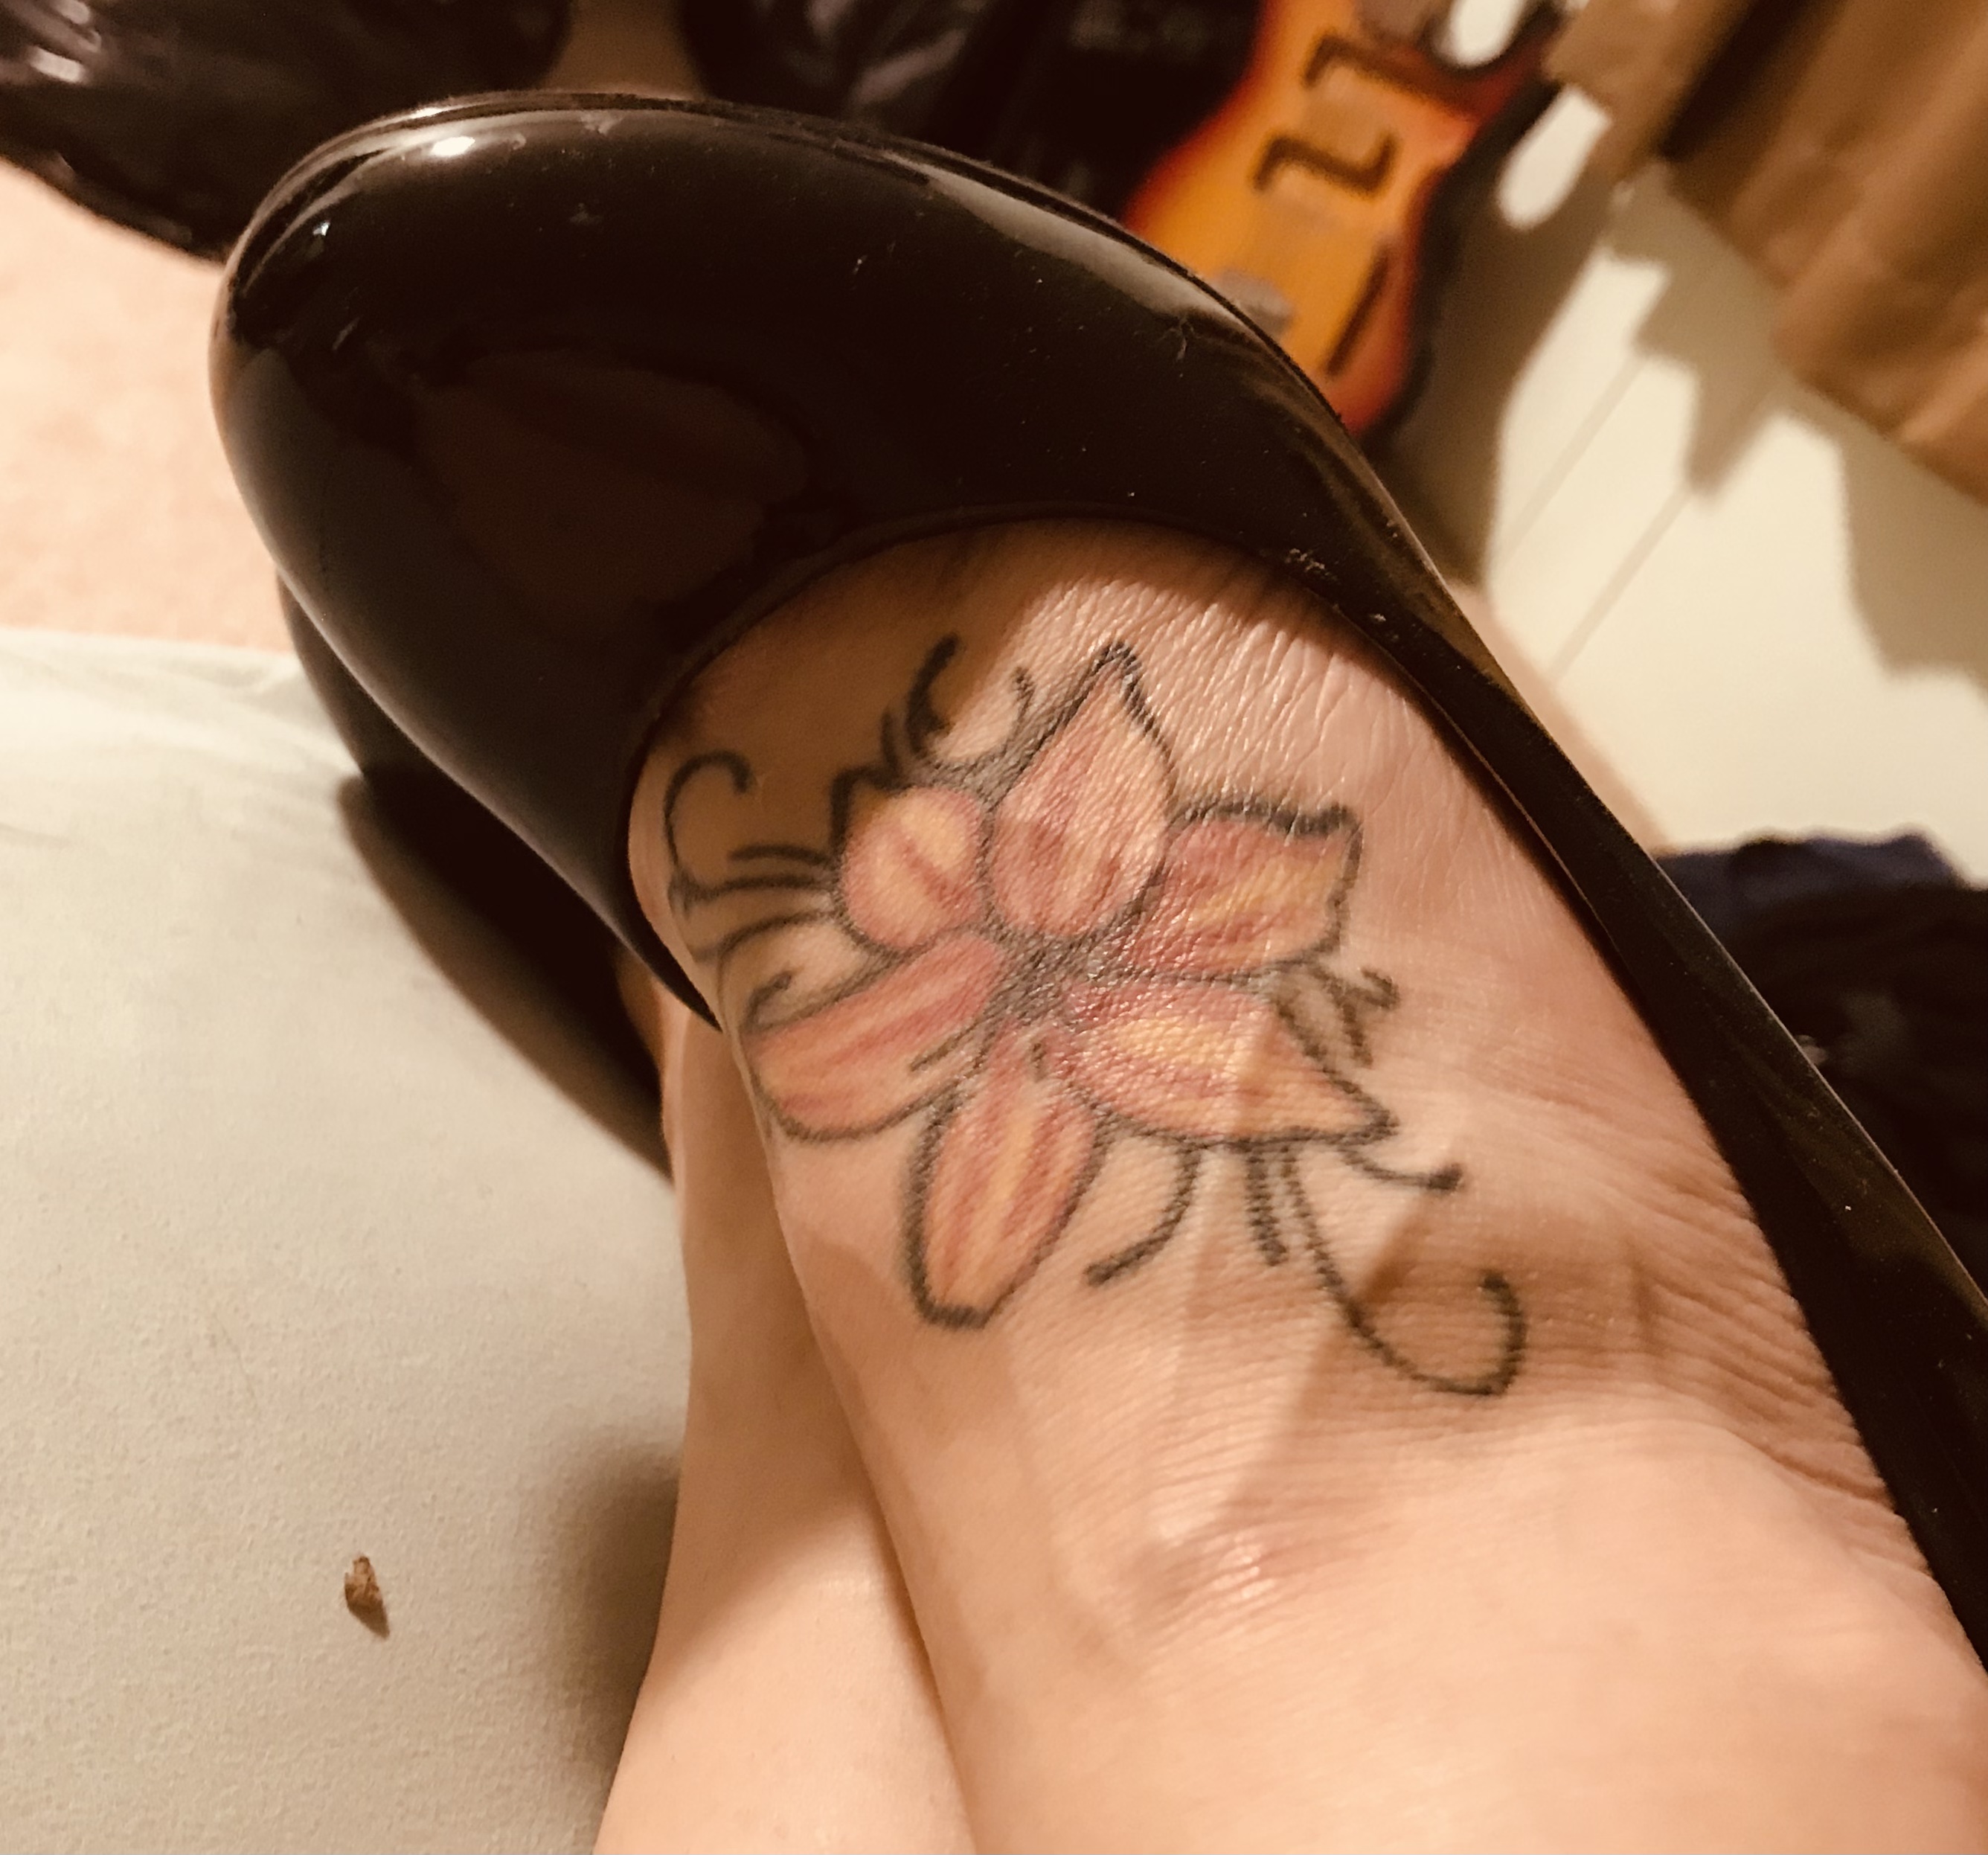 Black heels and lily tattoo